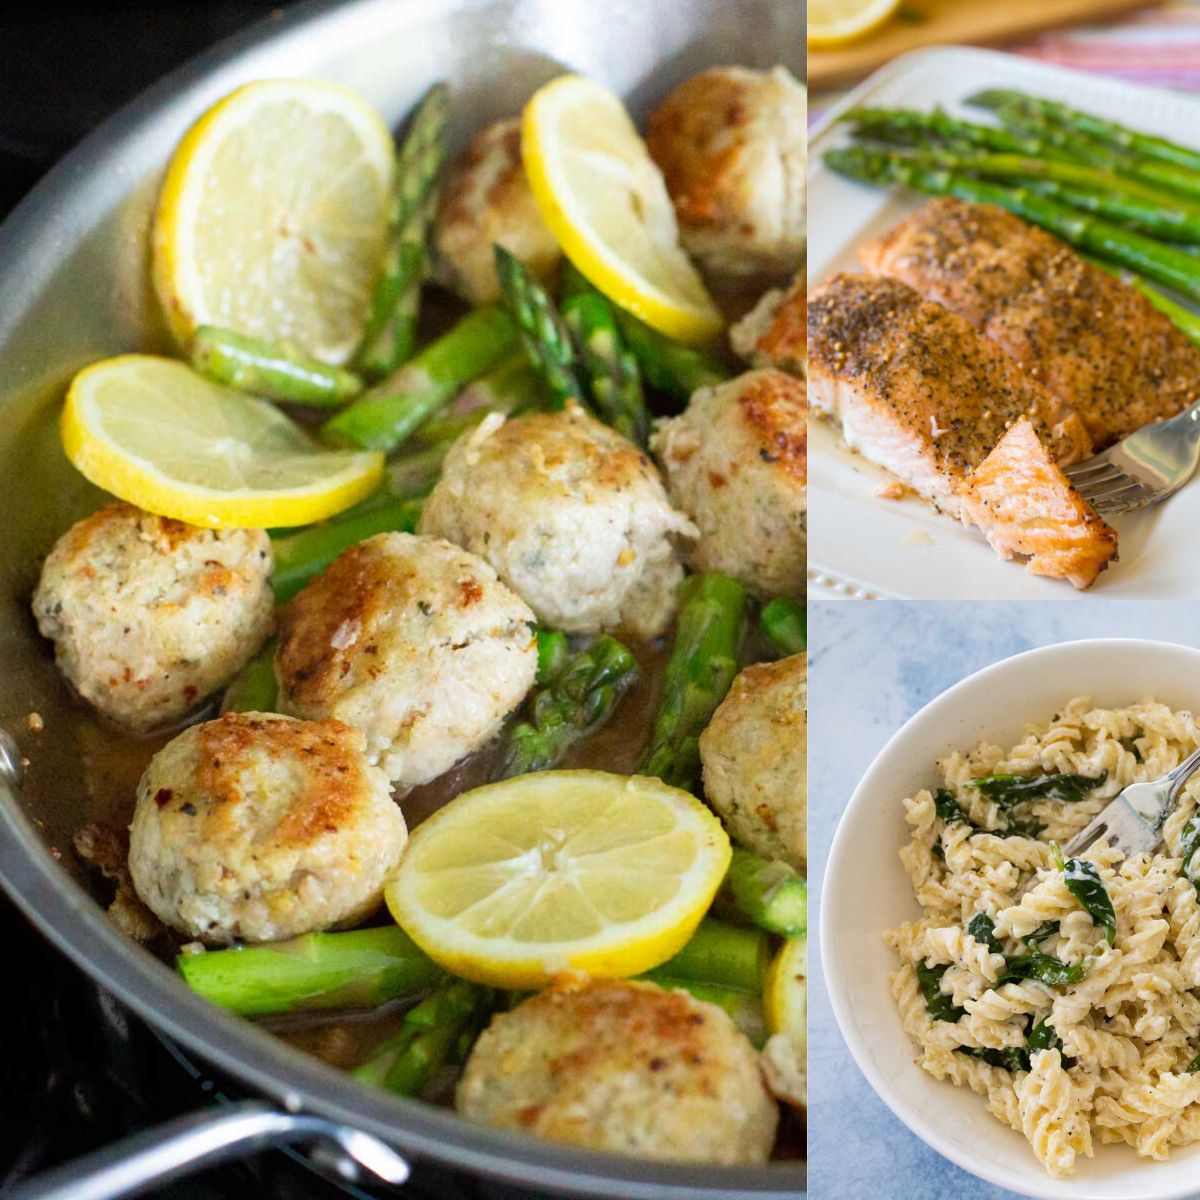 Several elegant dishes with lemon, asparagus, and pasta.